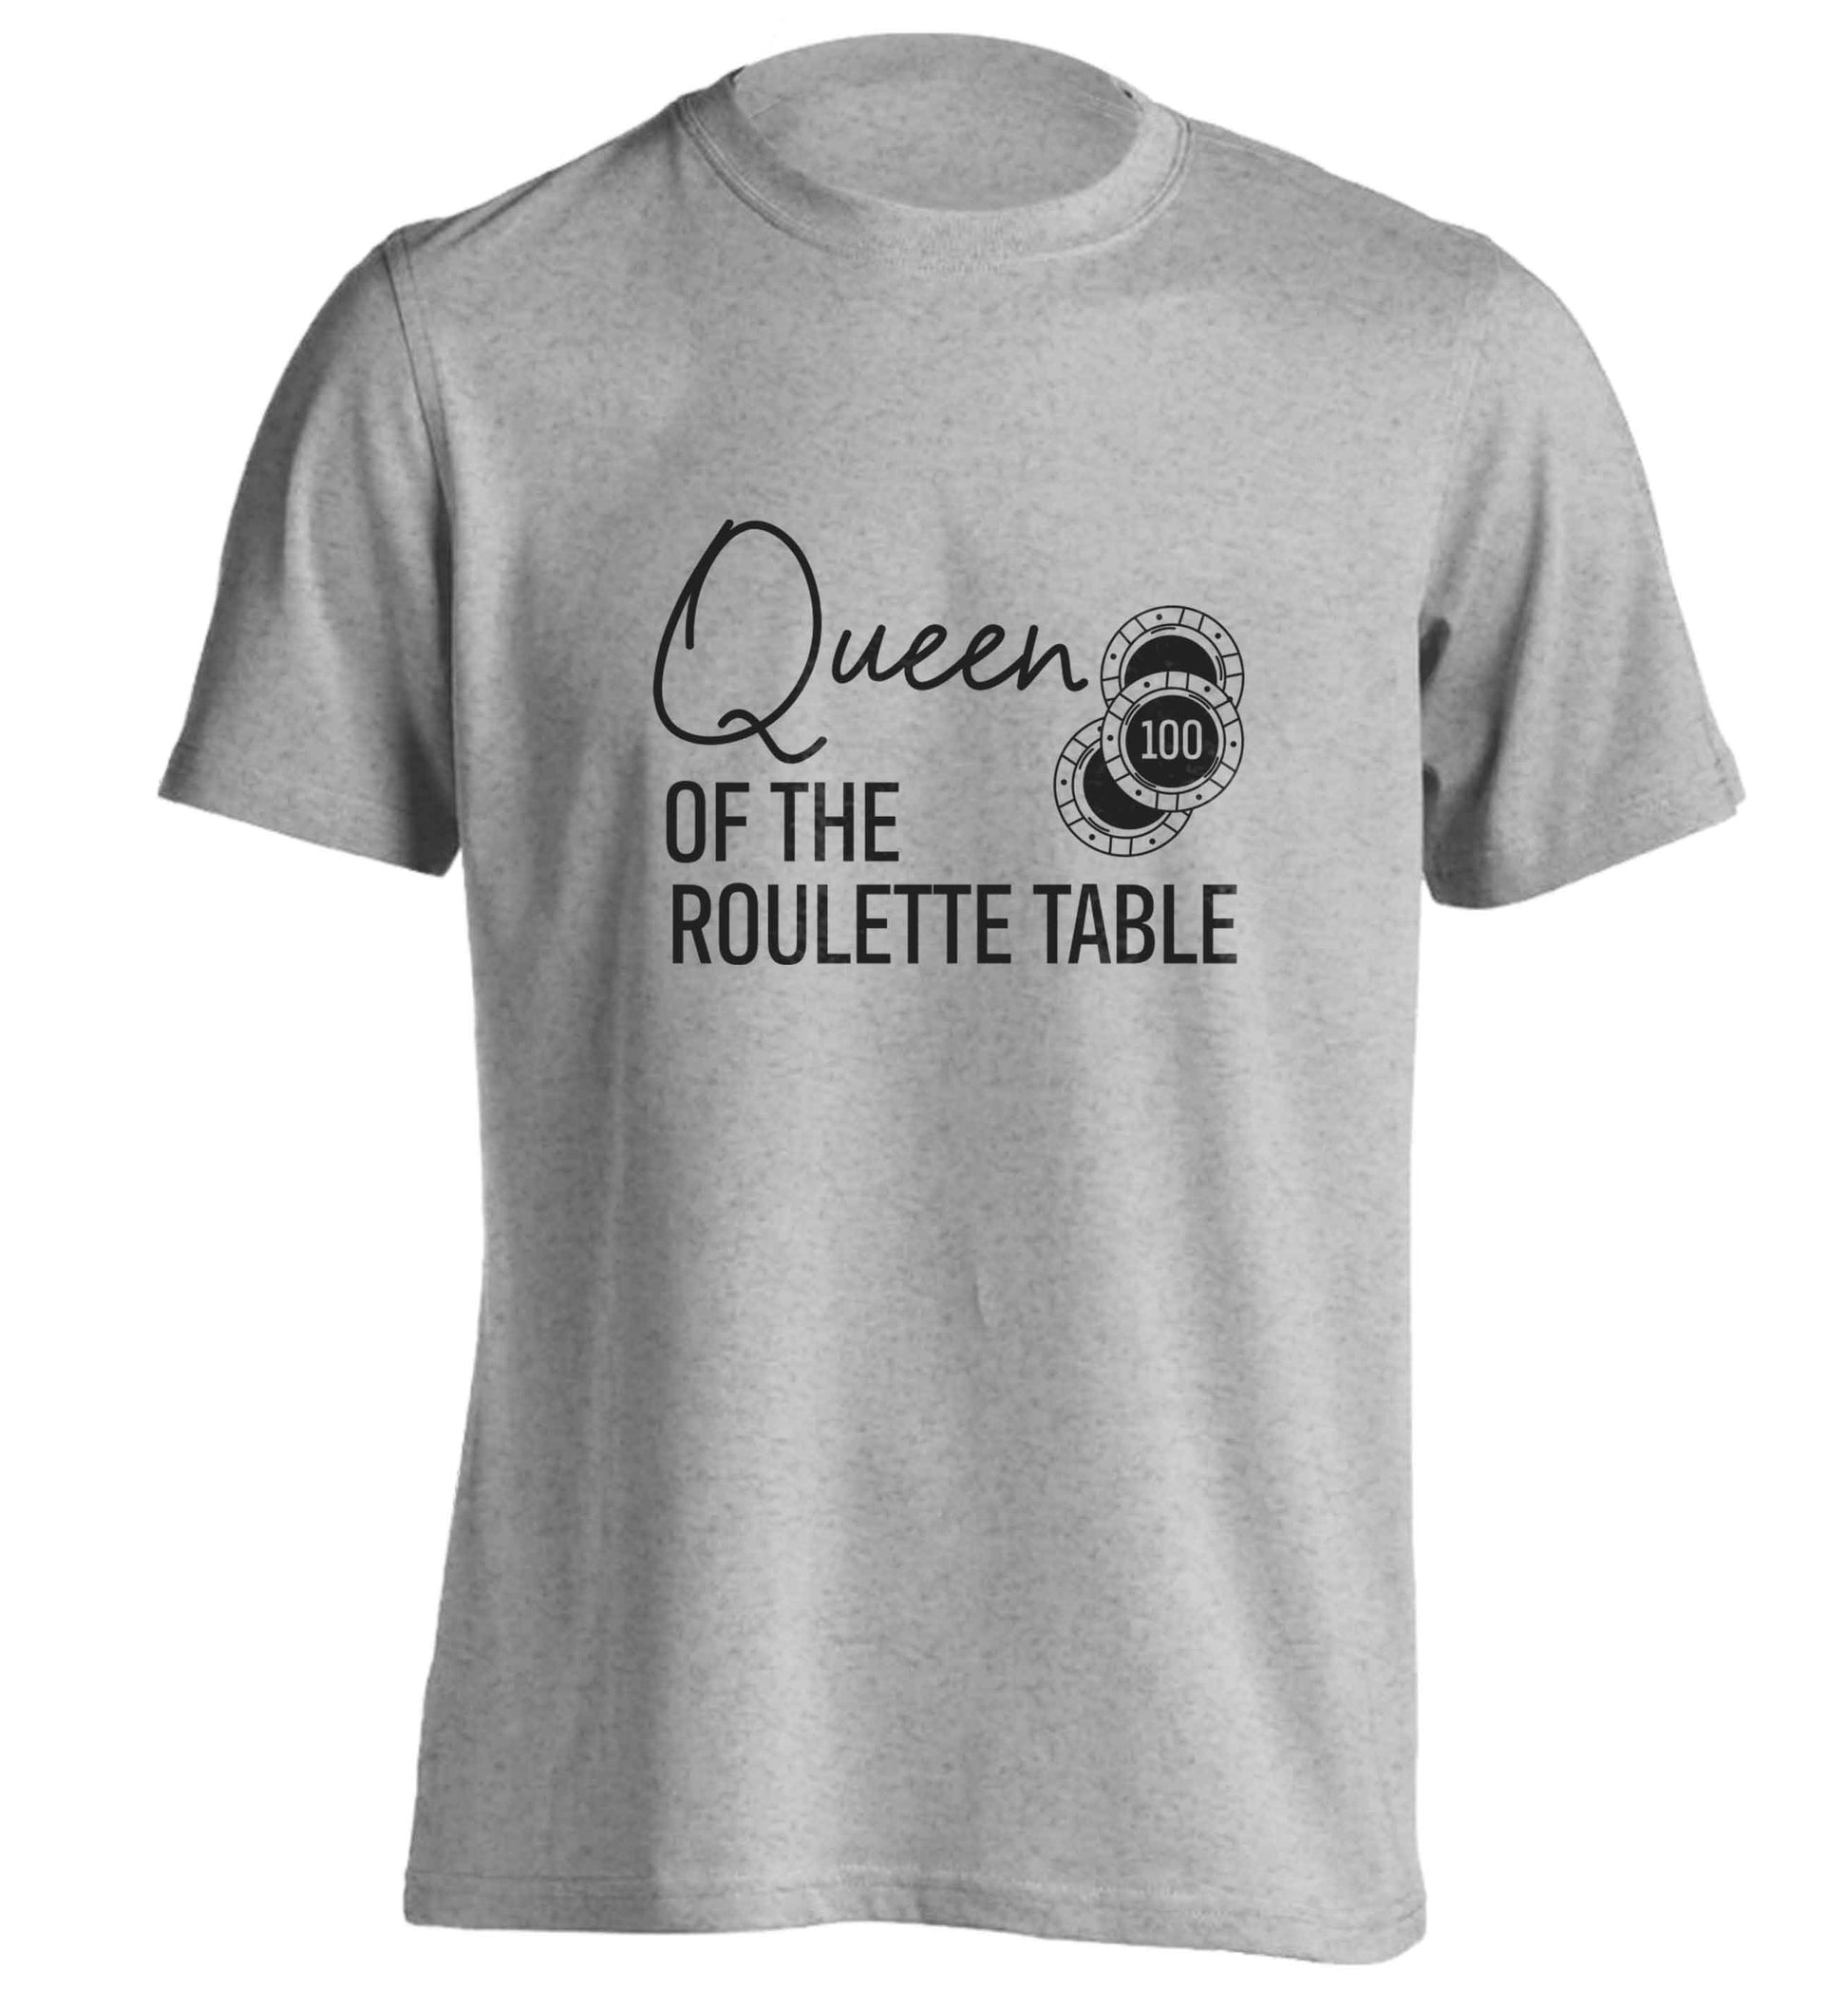 Queen of the roulette table adults unisex grey Tshirt 2XL